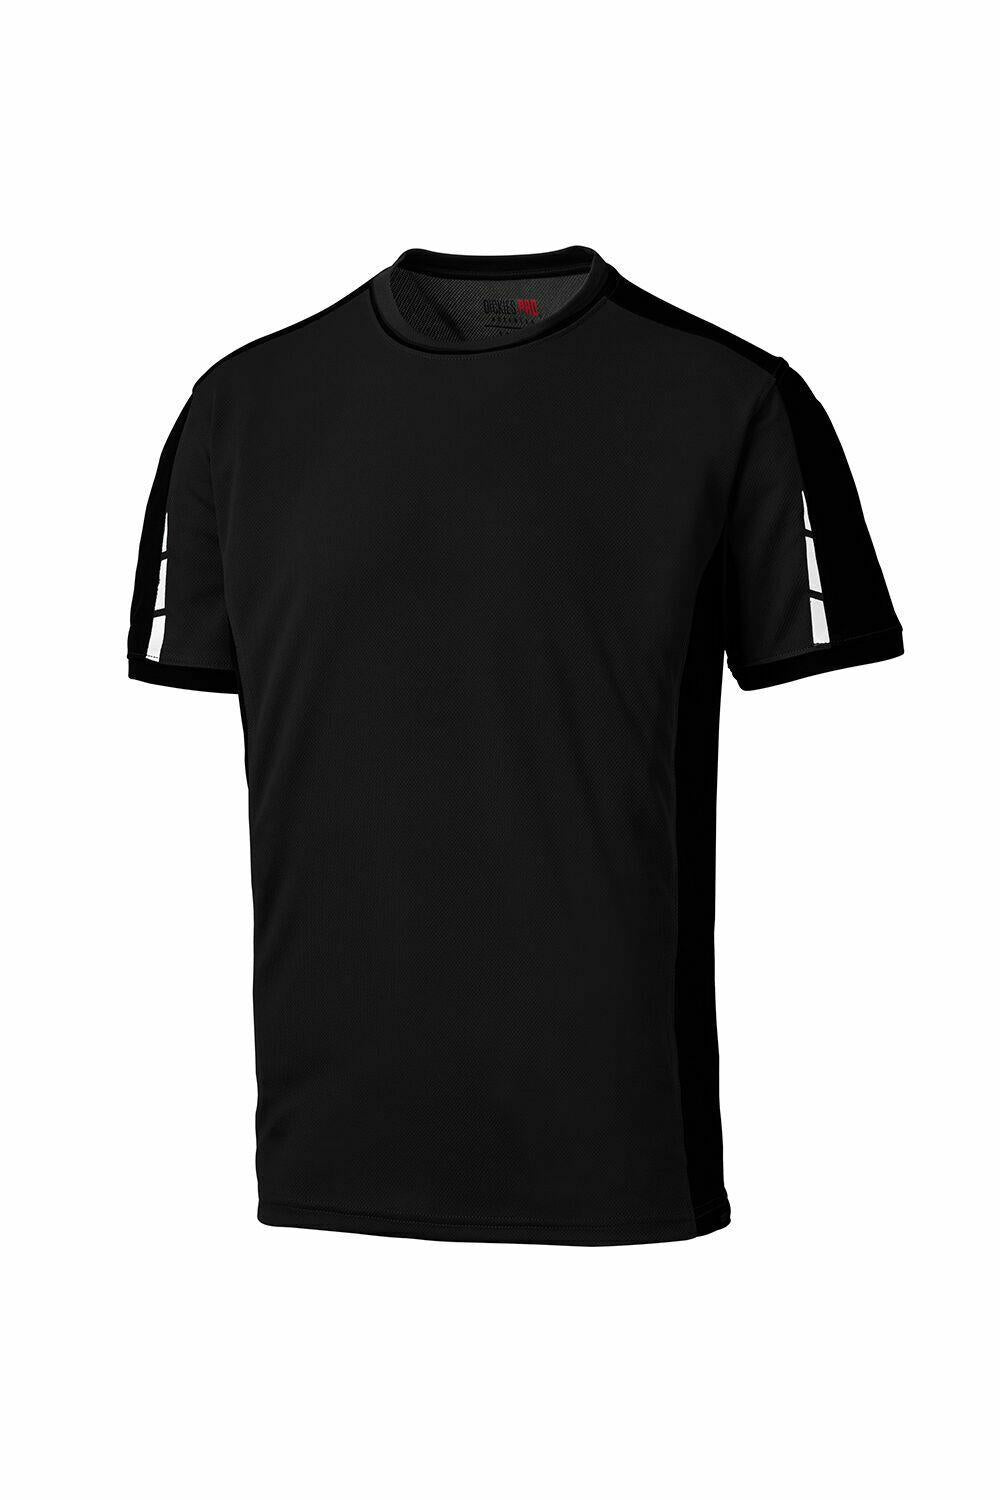 Dickies black polyester breathable crew-neck Tee T-shirt #DP1002